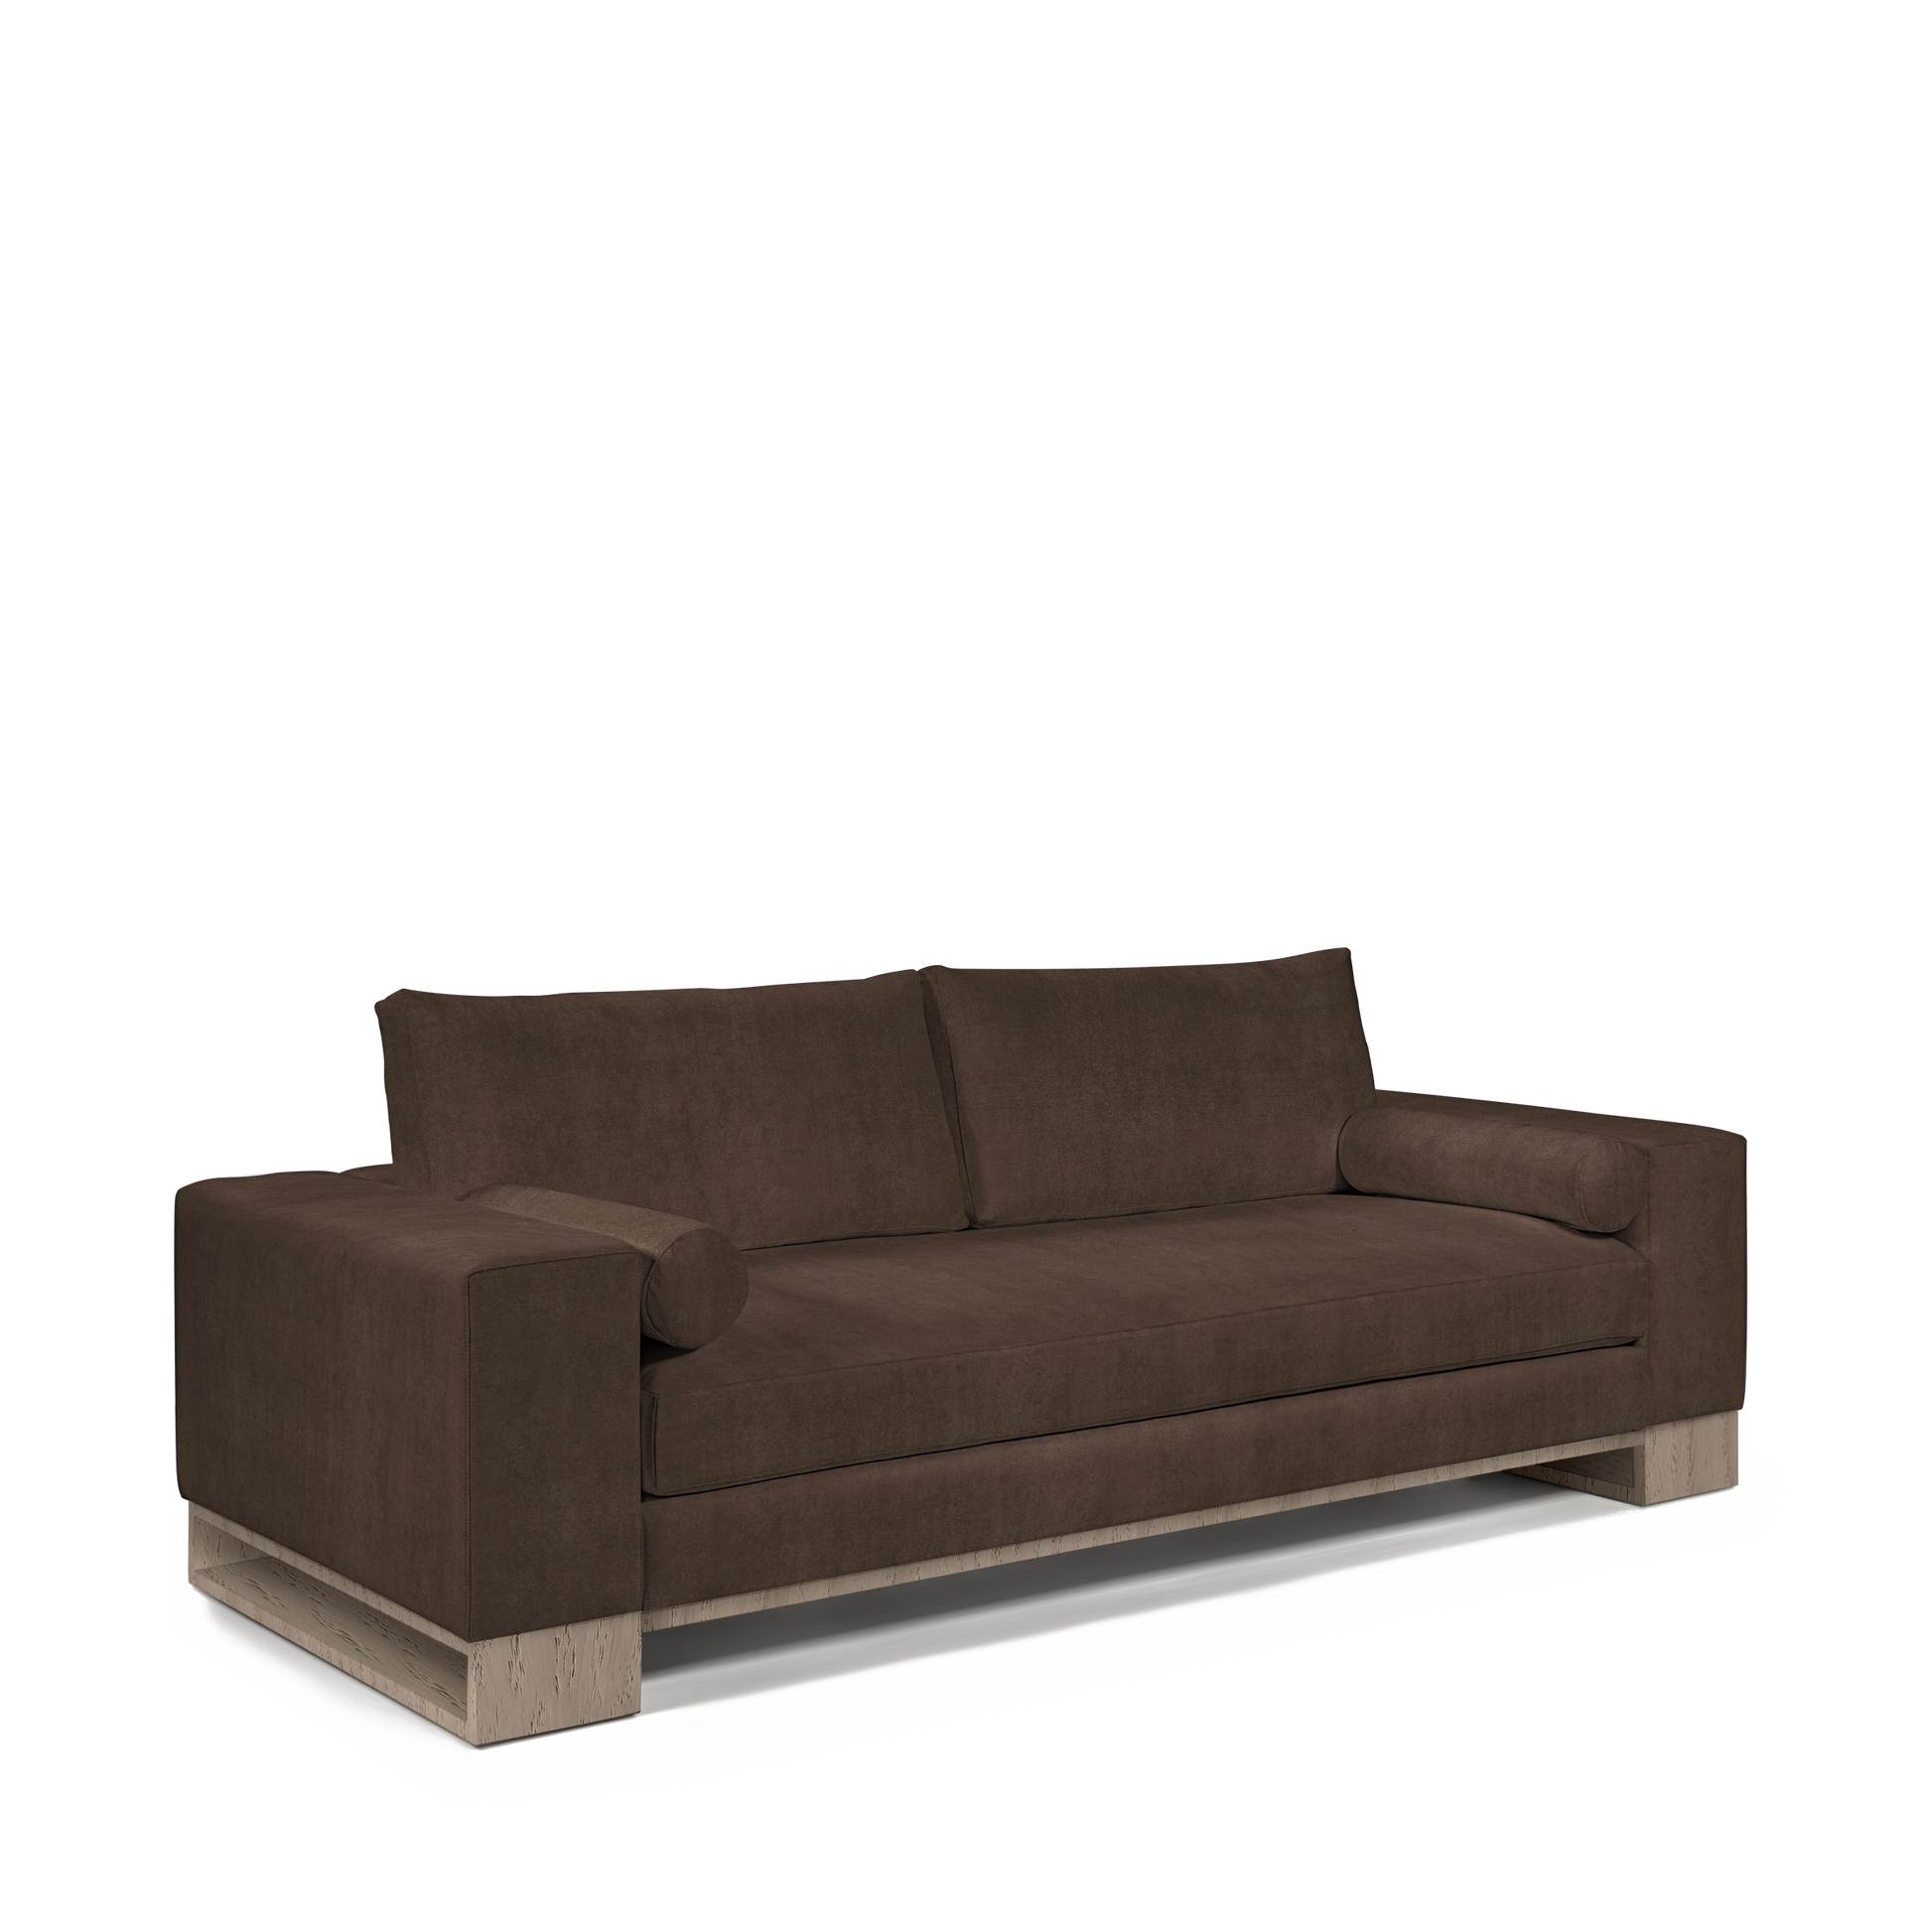 TERRA 2,5-seater sofa with suede brown textile and natural grey wood legs 